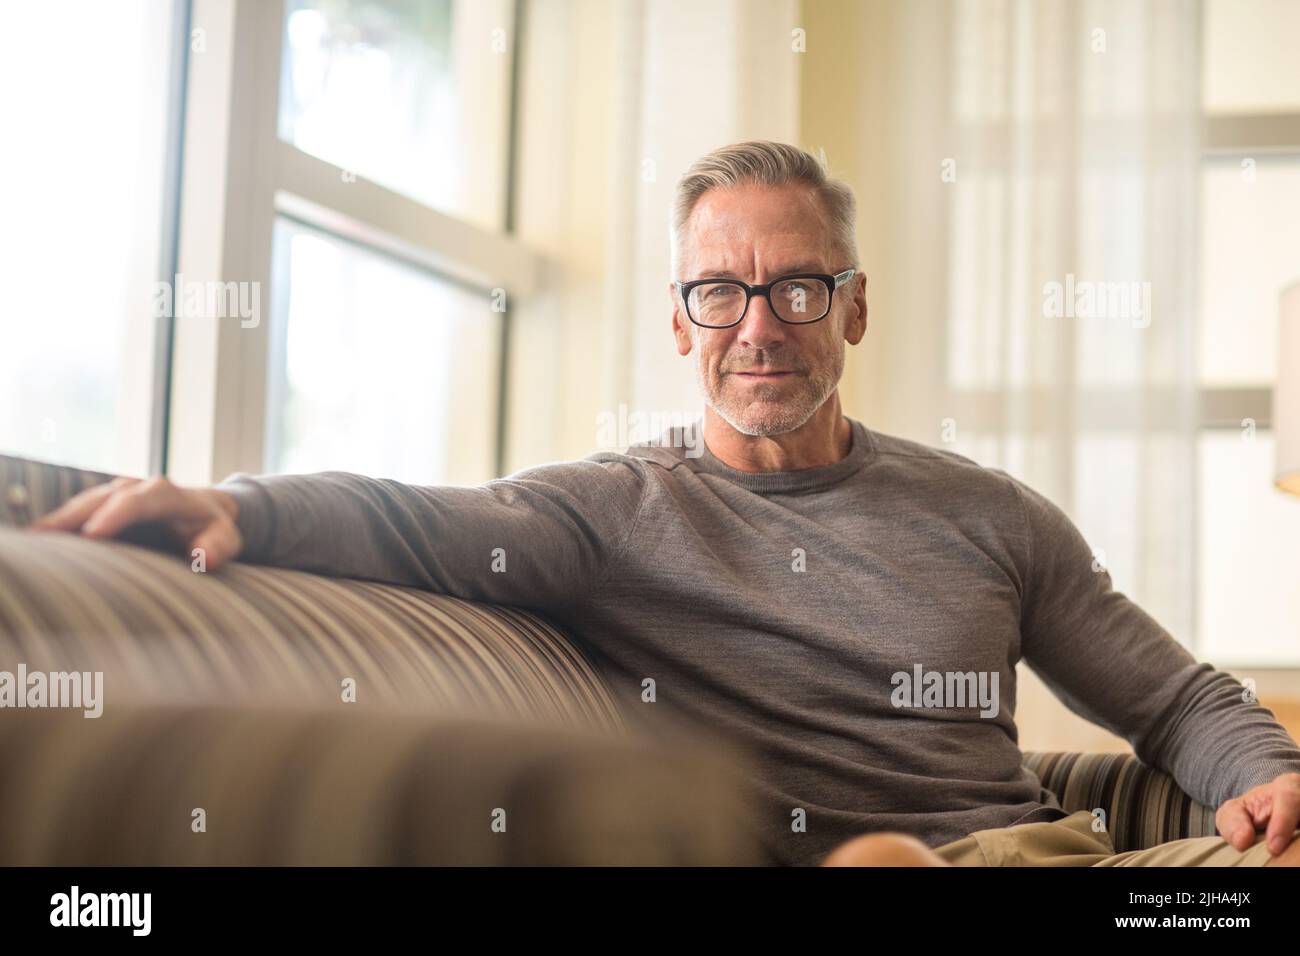 Handsome older man sitting on a sofa. Stock Photo